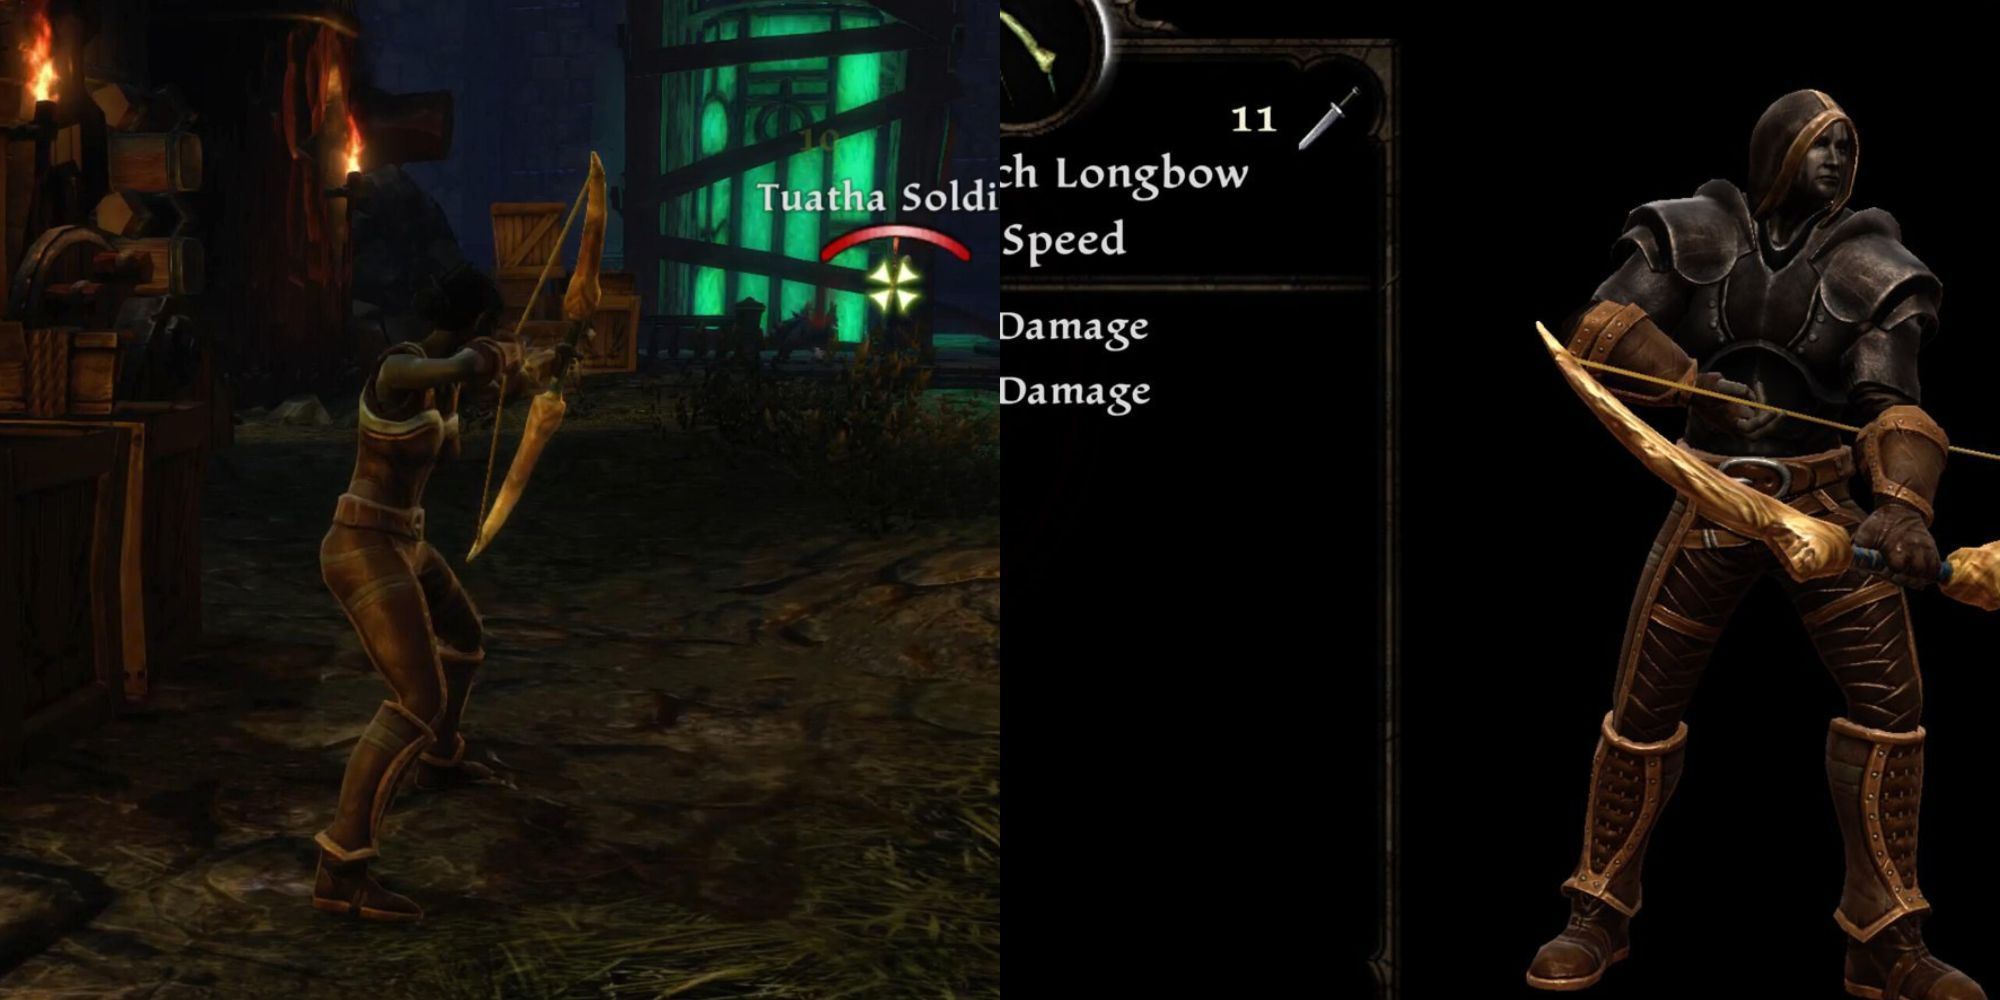 Kingdoms of Amalur ranged. Aiming the bow at a soldier, holding the bow in the inventory screen.